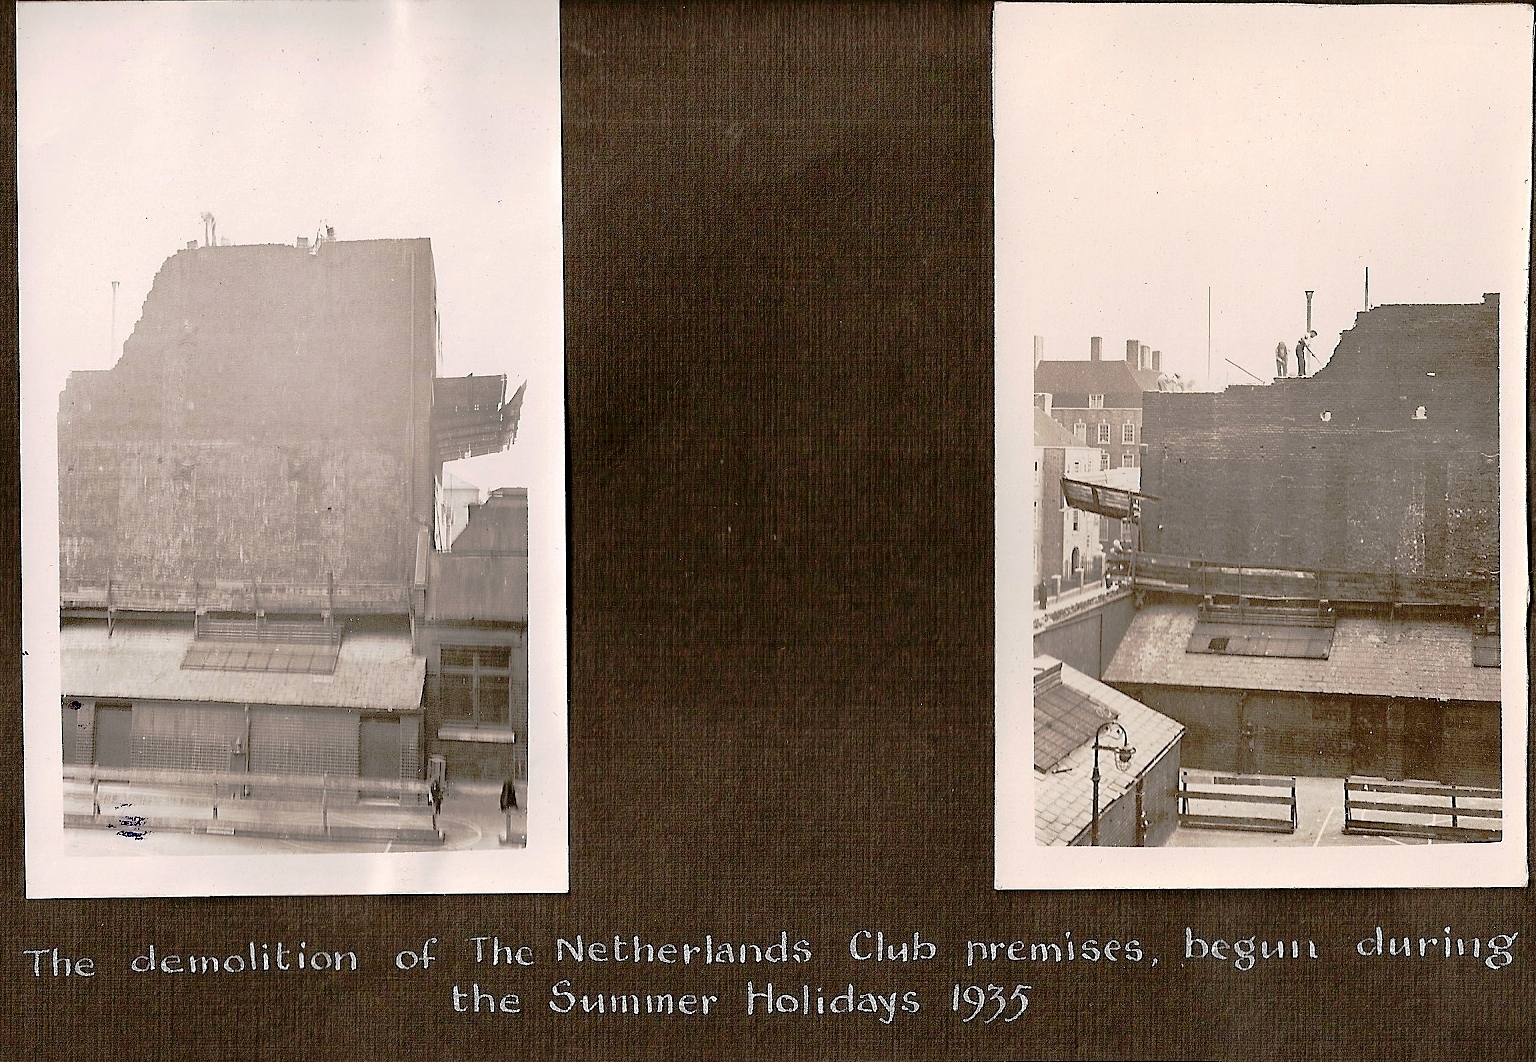 DEmolition of the Netherlands club, Bell Lane, begun during the 1935 Summer holidays